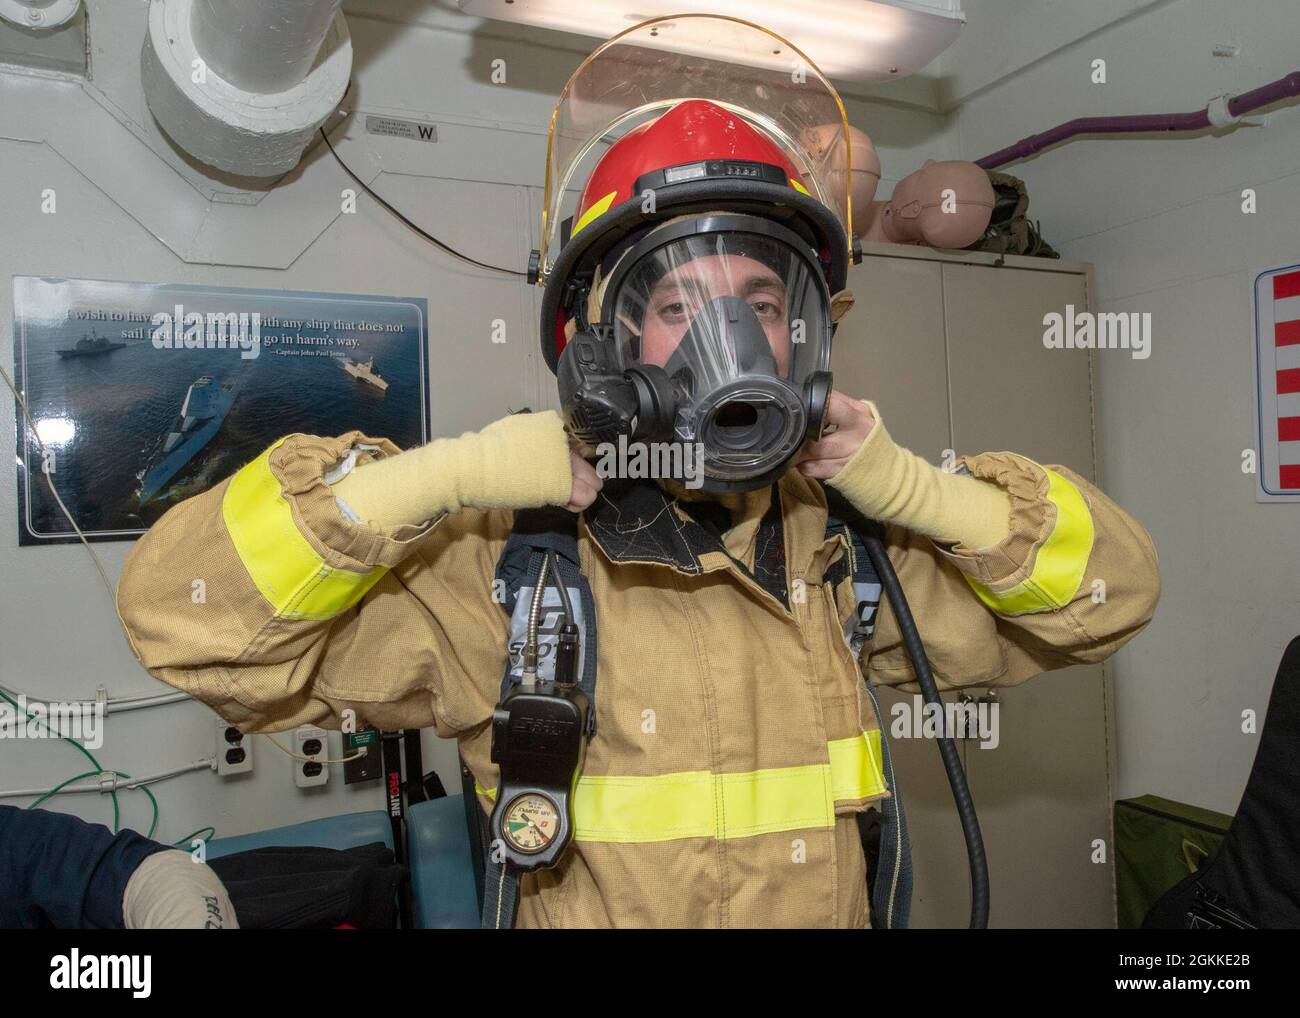 PACIFIC OCEAN (May 15, 2021) U.S. Navy Electronics Technician 3rd Class Bradley Sipes, from San Diego, puts on firefighting gear during a damage control drill aboard the Ticonderoga-class guided-missile cruiser USS Bunker Hill (CG 52) May 15, 2021. Bunker Hill, part of the Theodore Roosevelt Carrier Strike Group, is on a scheduled deployment conducting routine operations in U.S. 3rd Fleet. Stock Photo